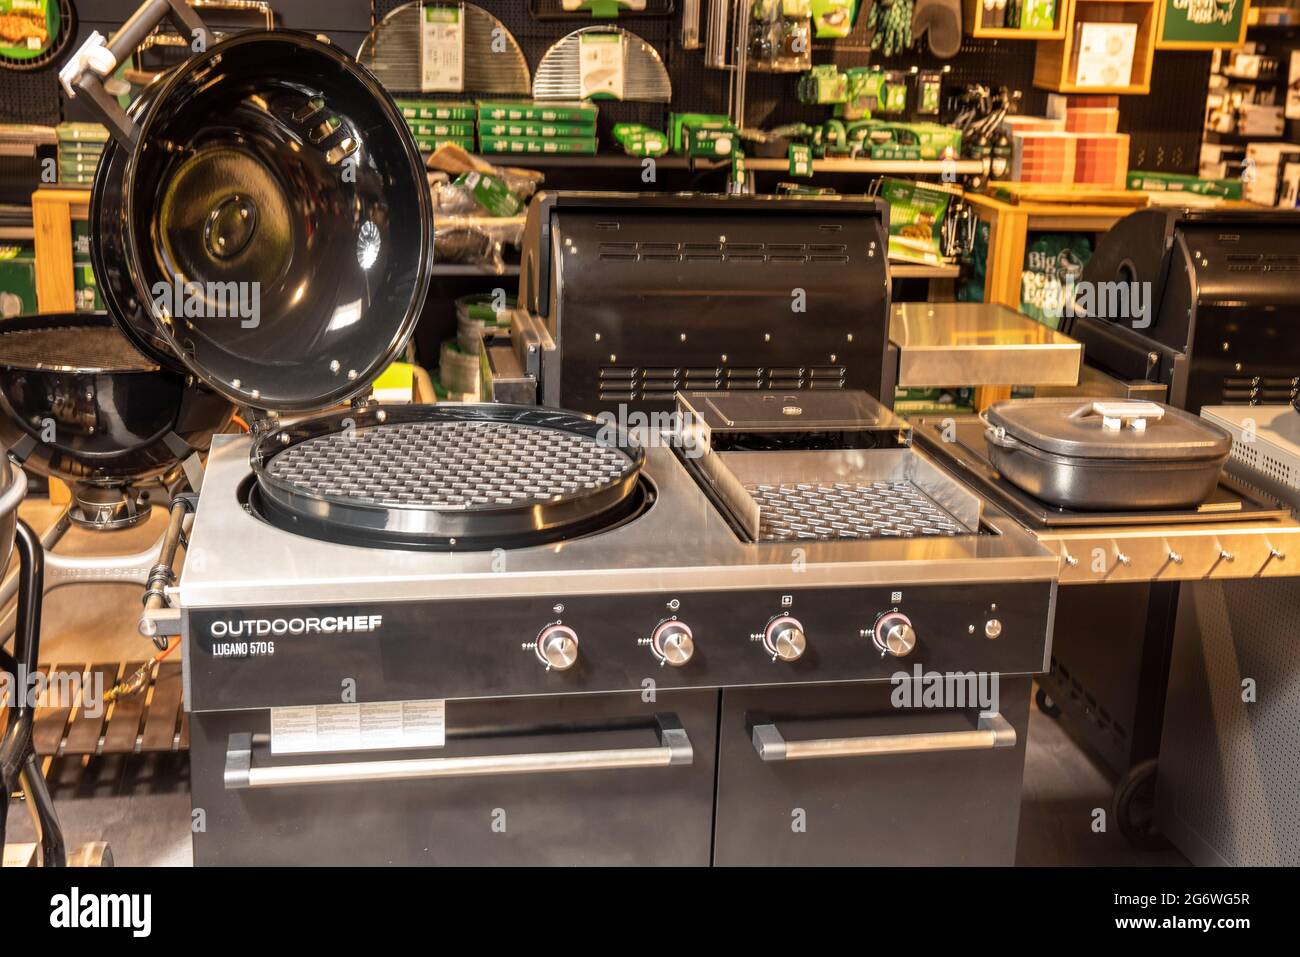 Bad Hersfeld, Germany. 30th June, 2021. An Outdoorchef Lugano grill station  stands in the headquarters of Grillfürst GmbH. (to dpa 